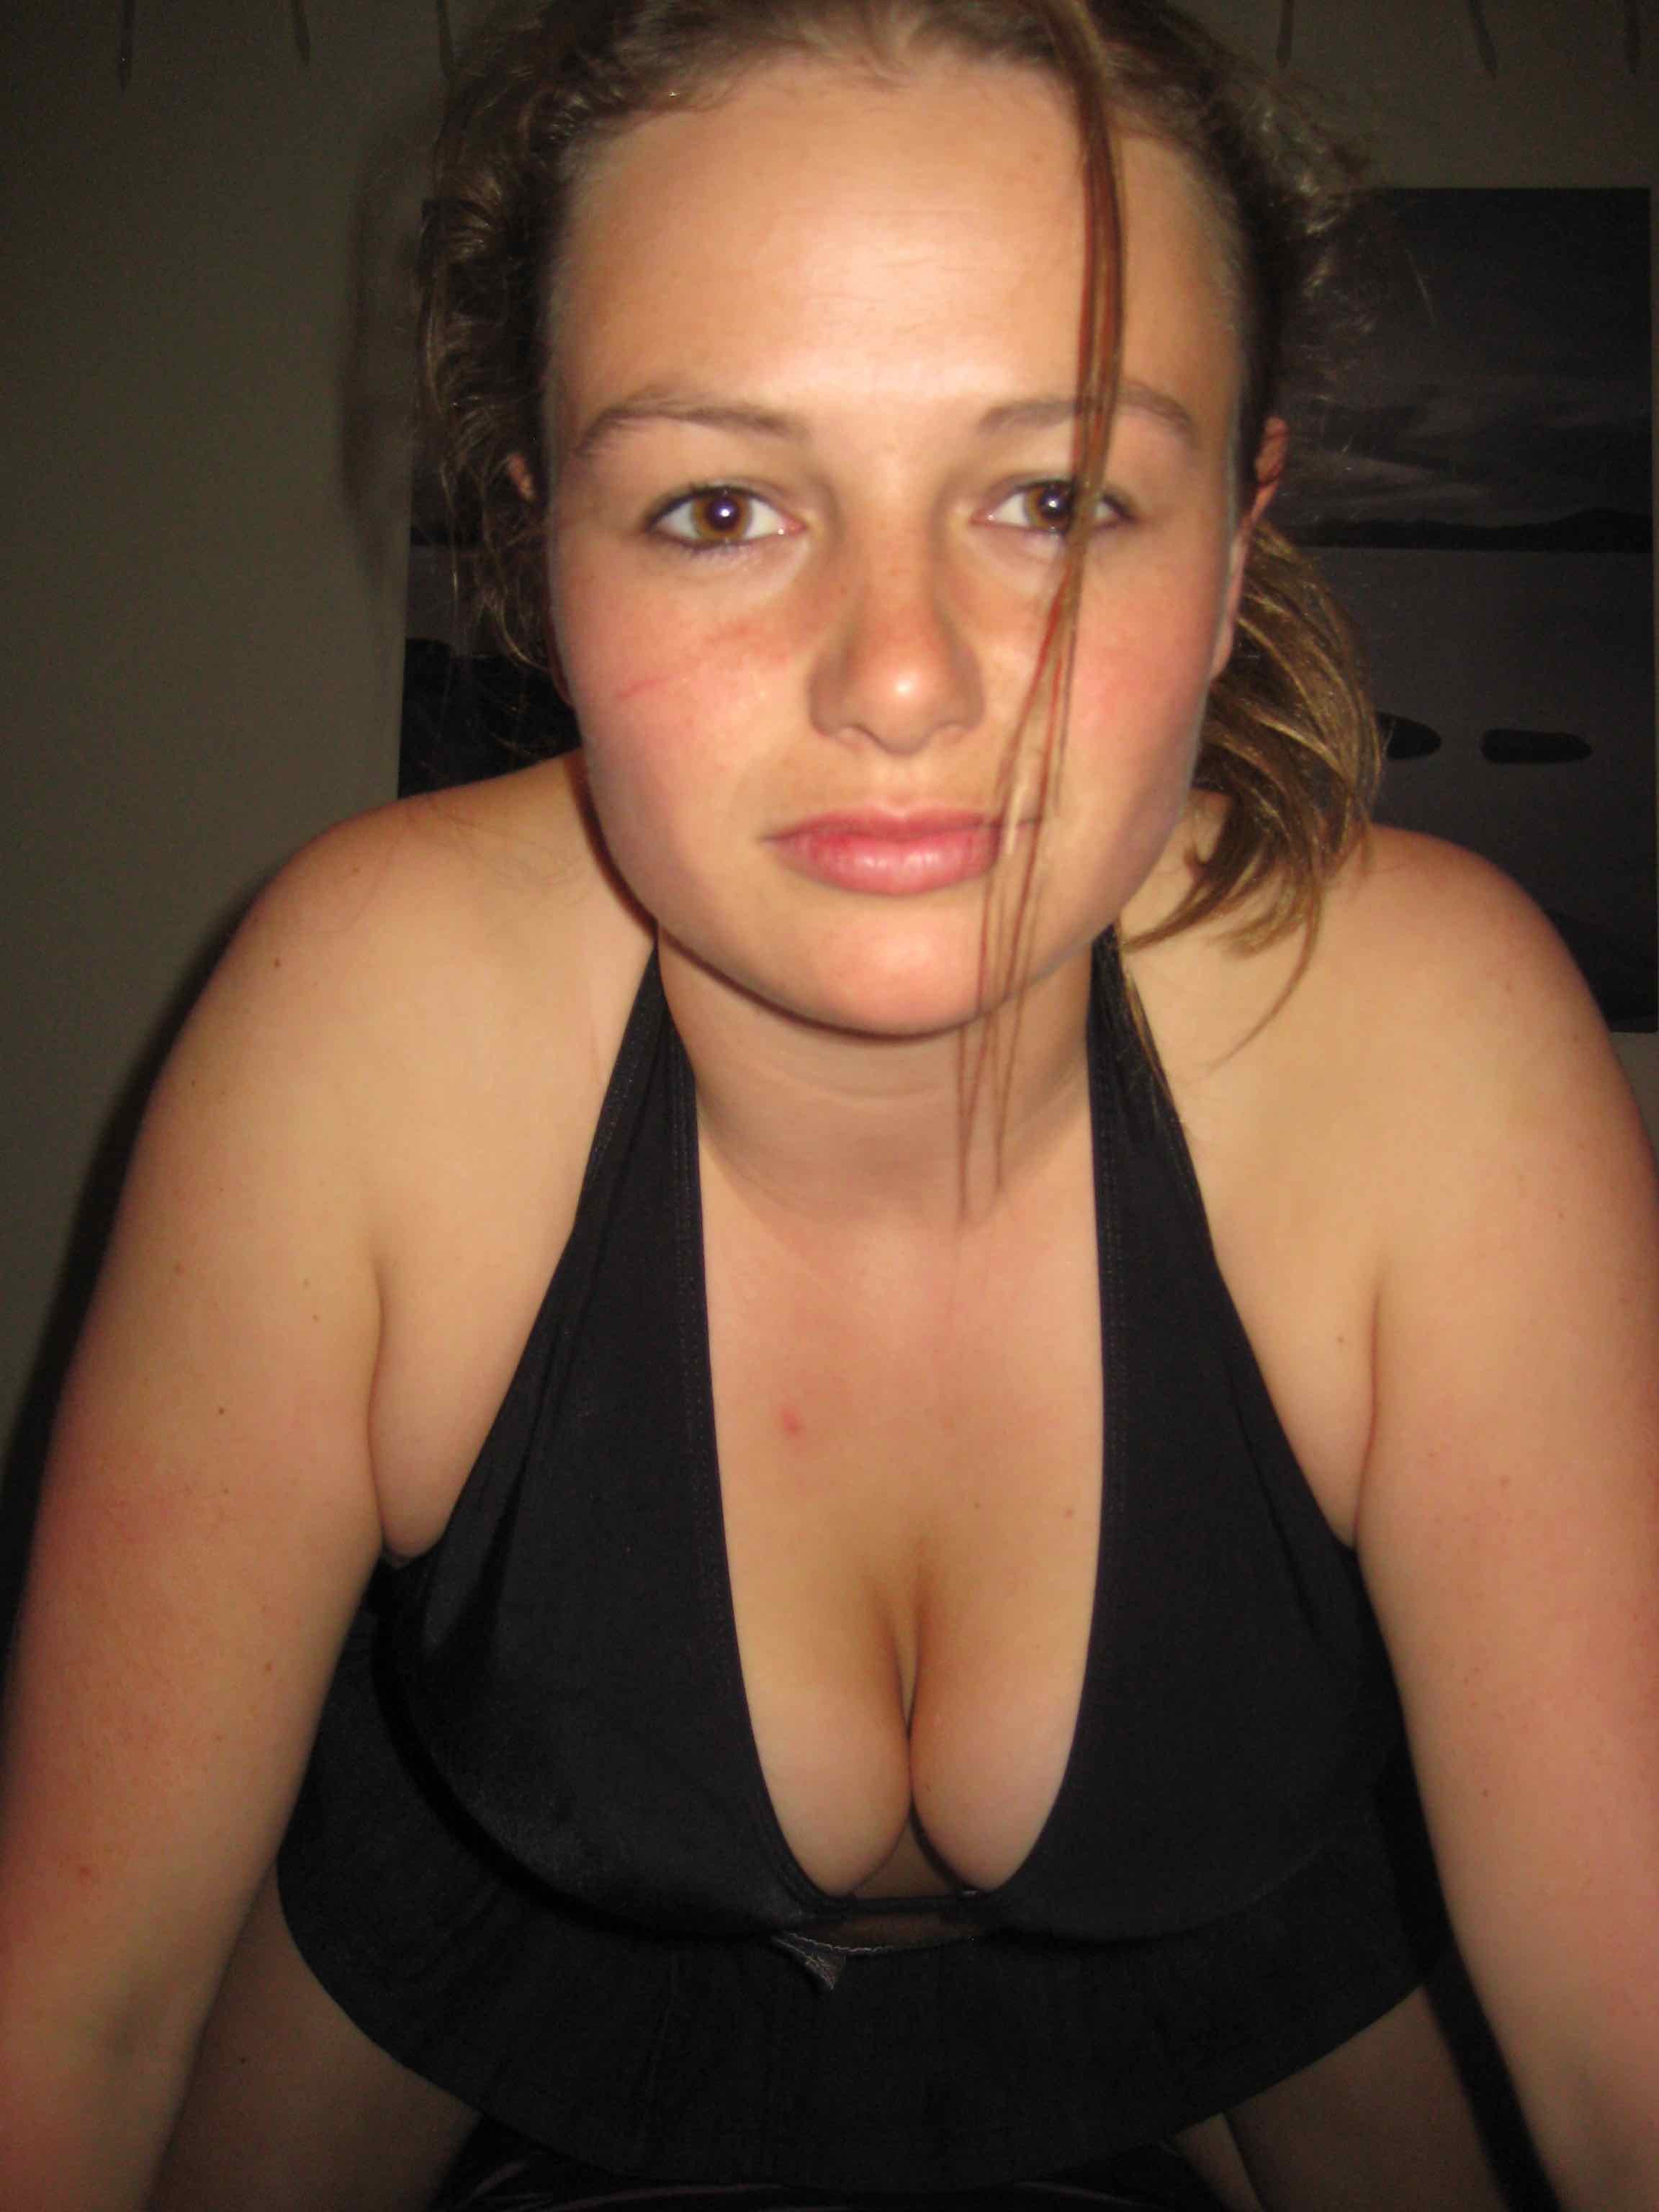 Amateur Girlfriend Shelly with Big Tits pic image